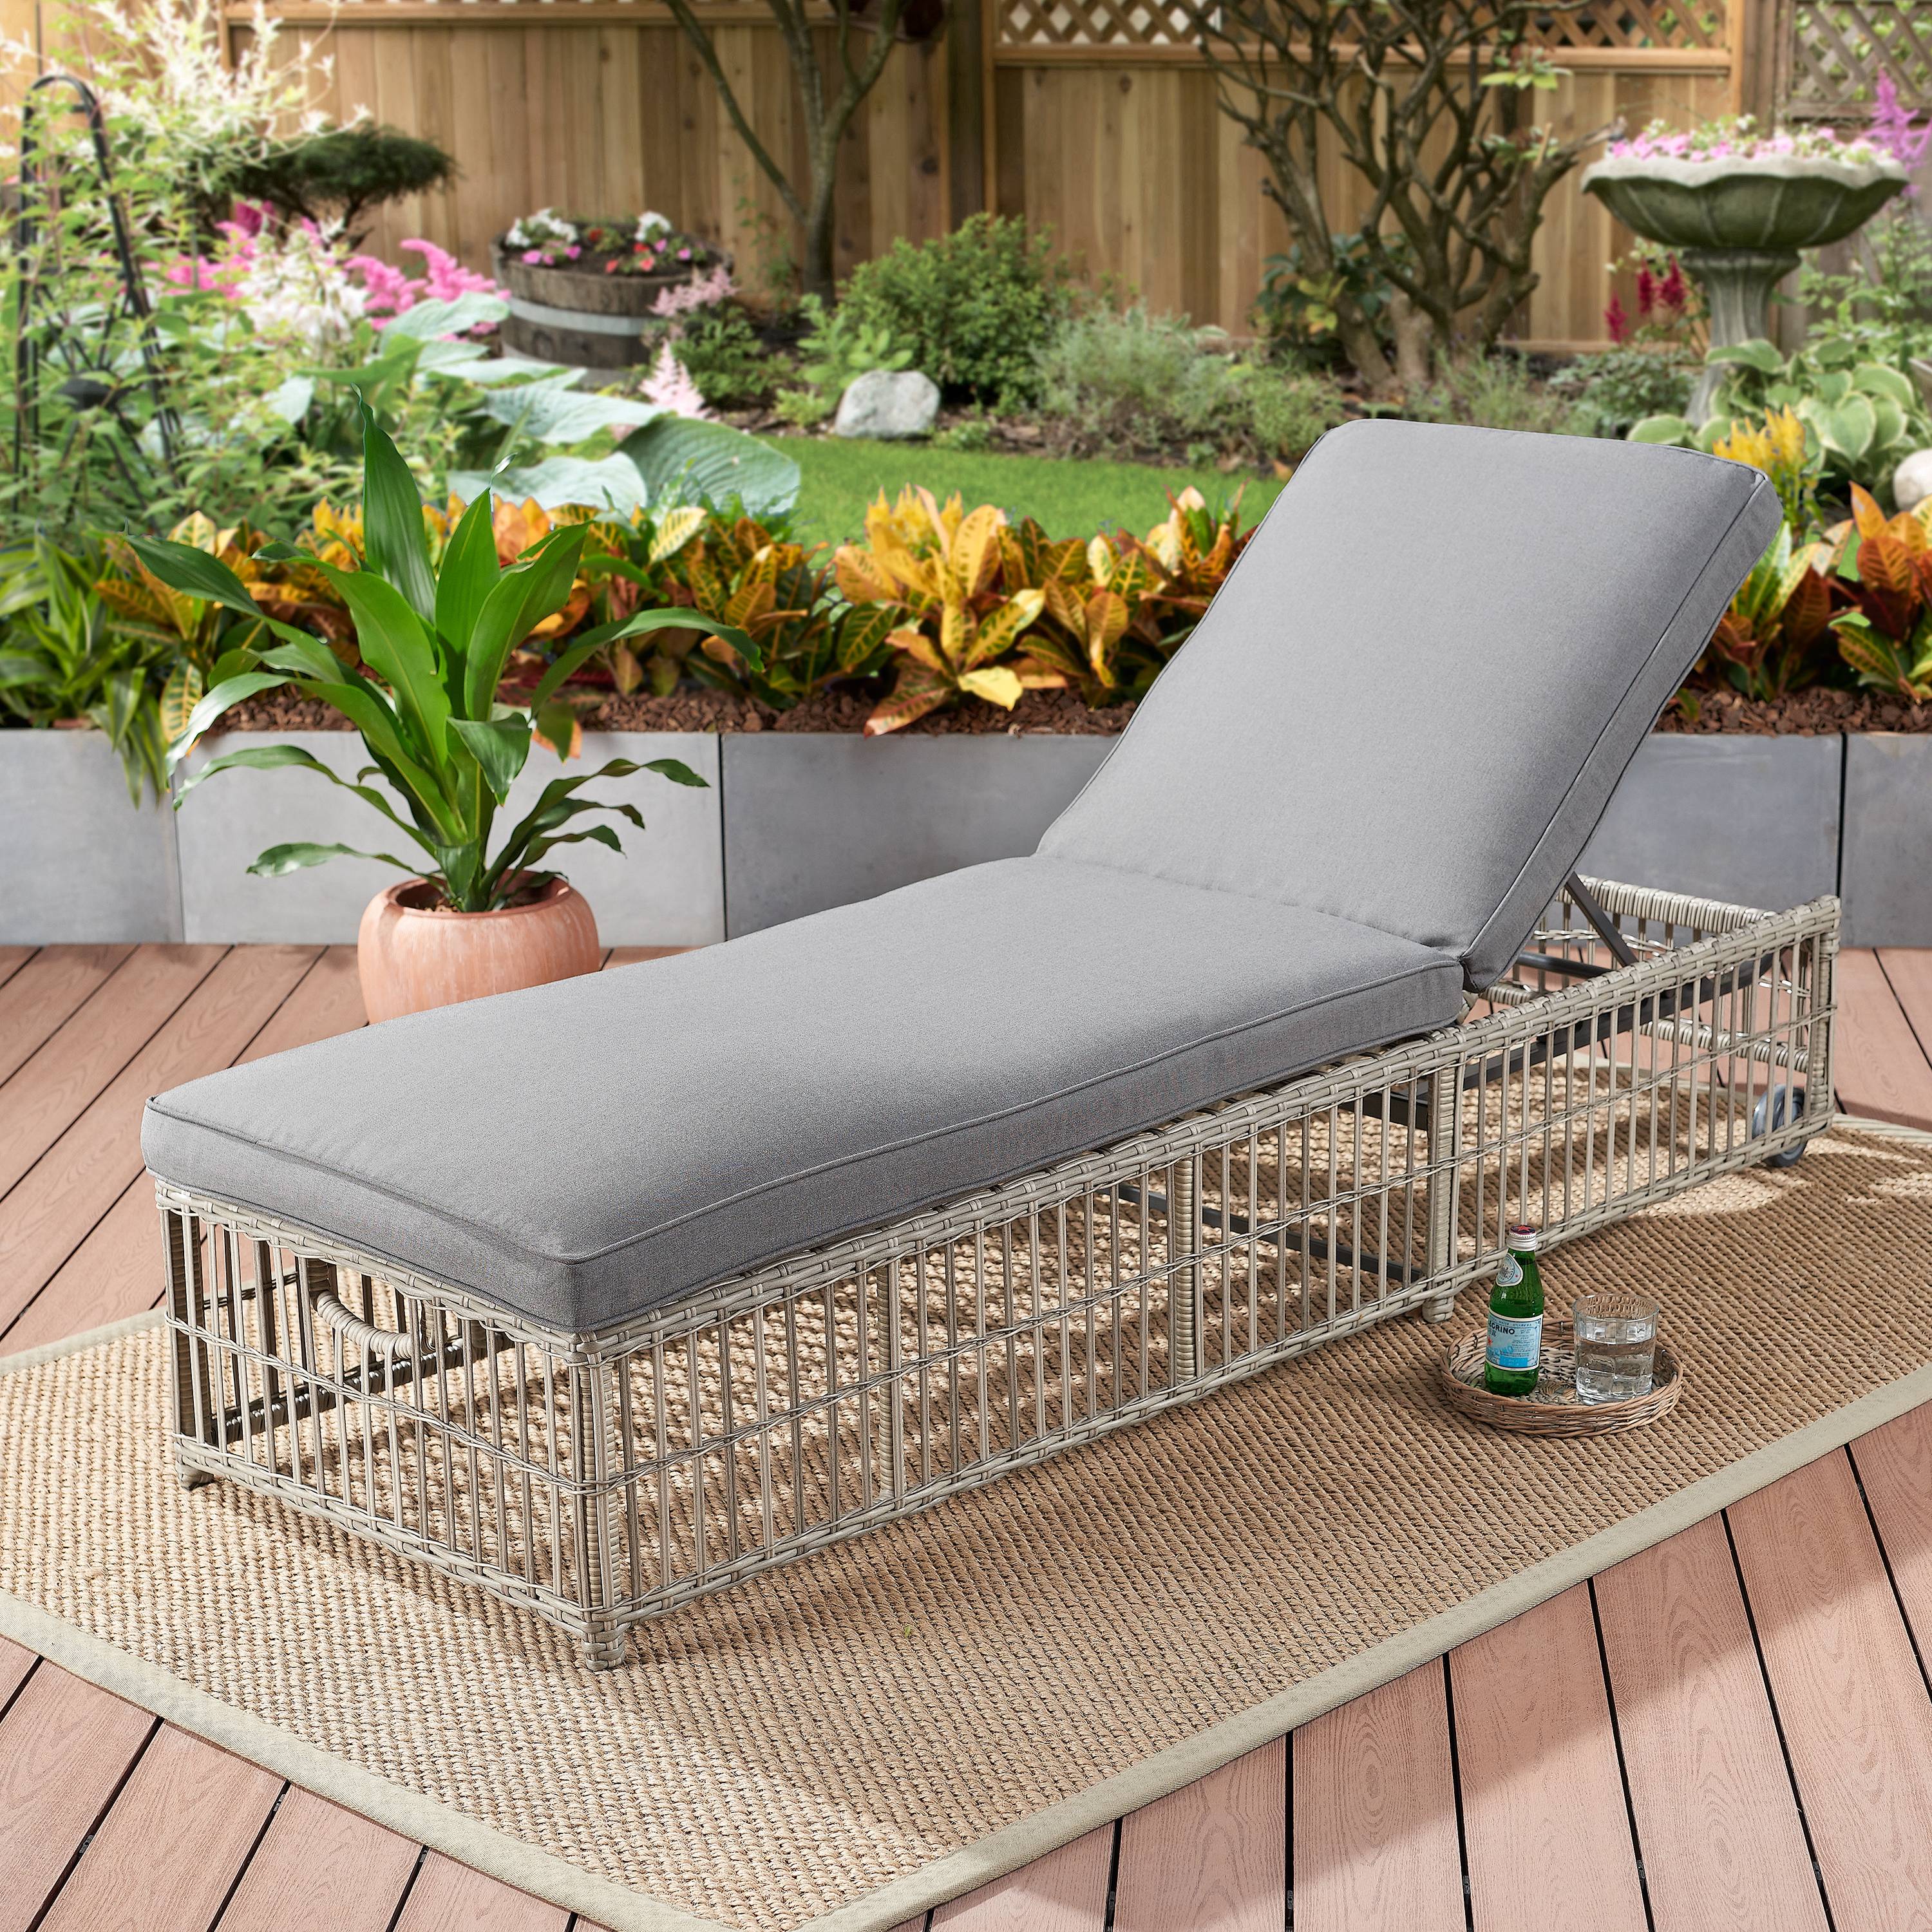 Better Homes & Gardens Belfair Outdoor Wicker Chaise Lounge with Gray Cushions - image 5 of 5